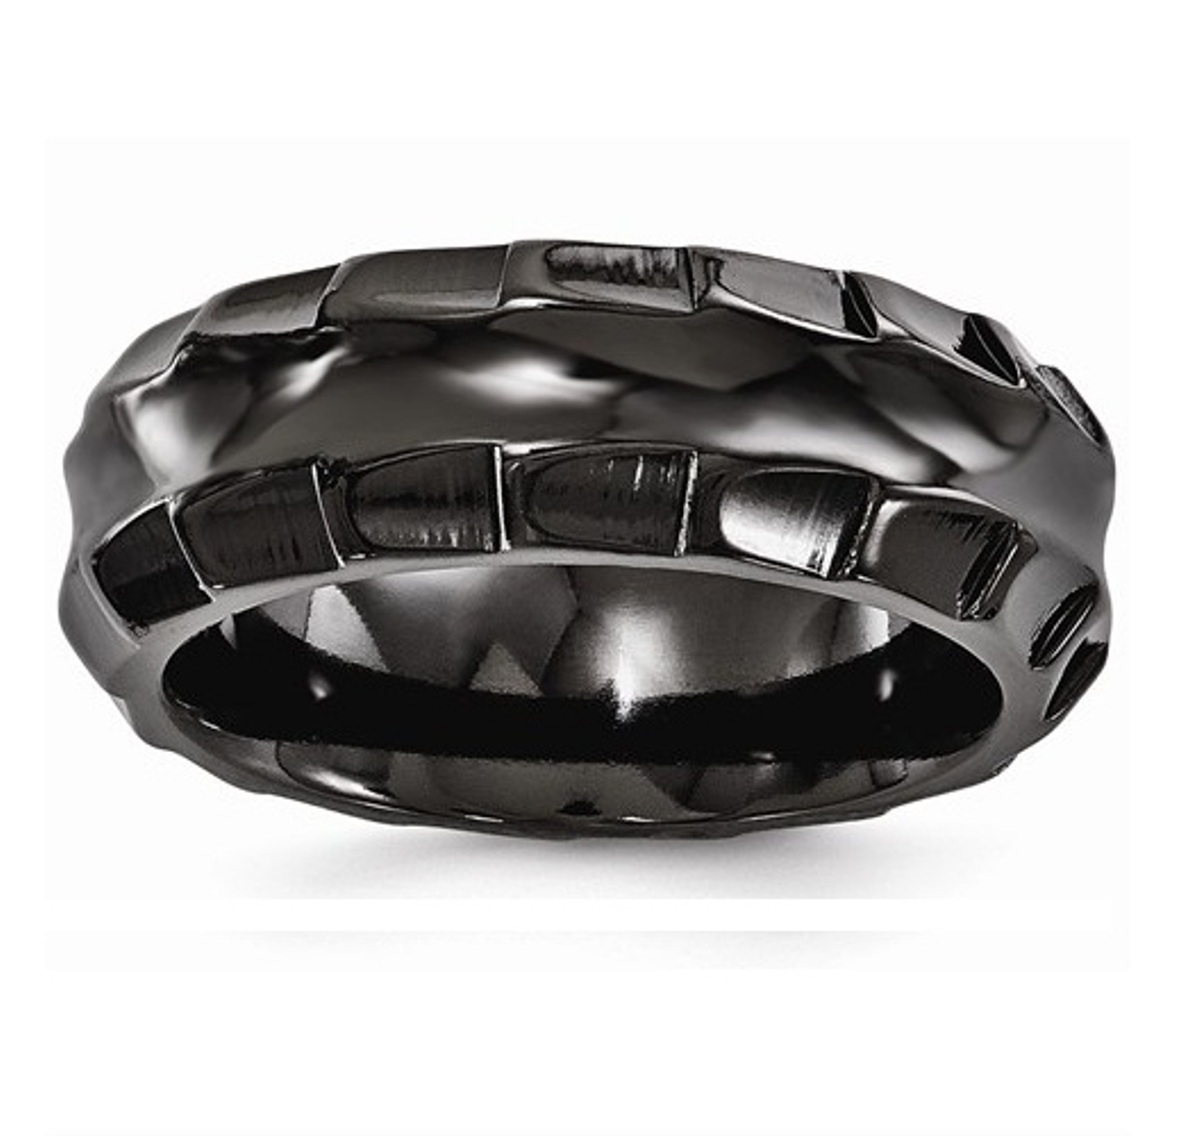  Black Ti Polished Faceted Edges 8mm Ring